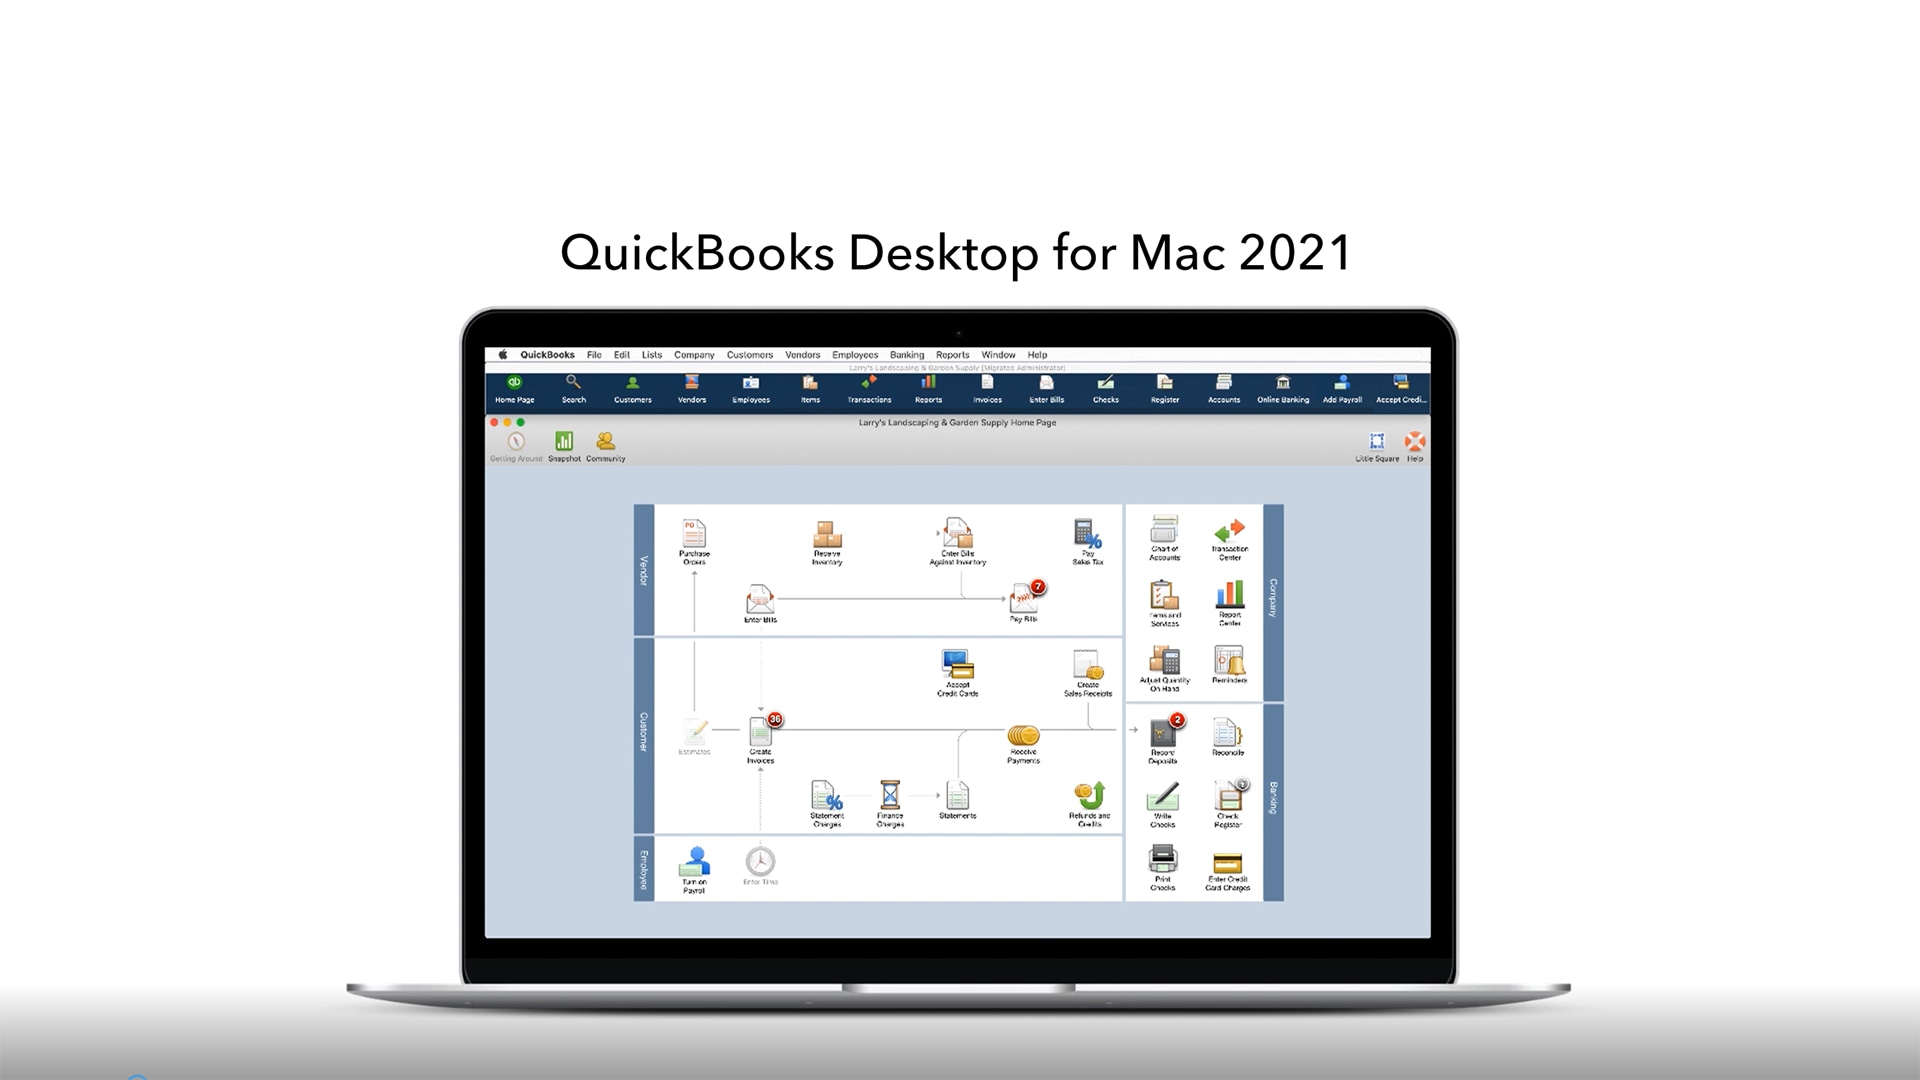 i want to view quickbooks for mac on my ipad